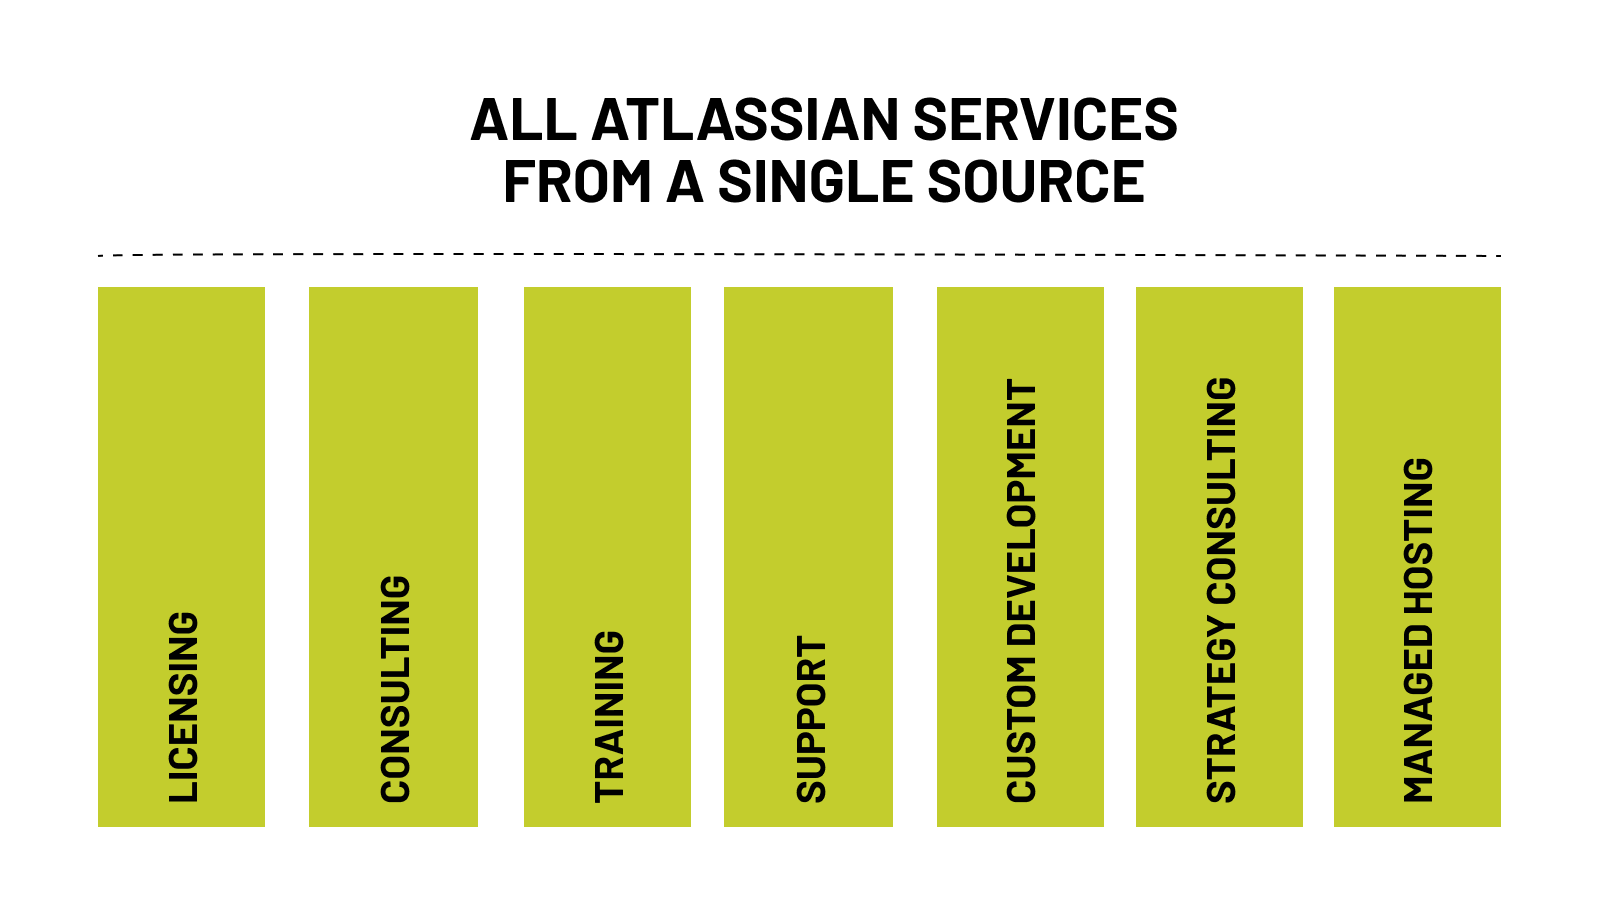 #5become1 or: Why we can achieve more for your Atlassian ecosystem with Seibert Solutions - graph showing all services Seibert Solutions offers: licensing, consulting, training, support, custom development, strategy consulting, and managed hosting